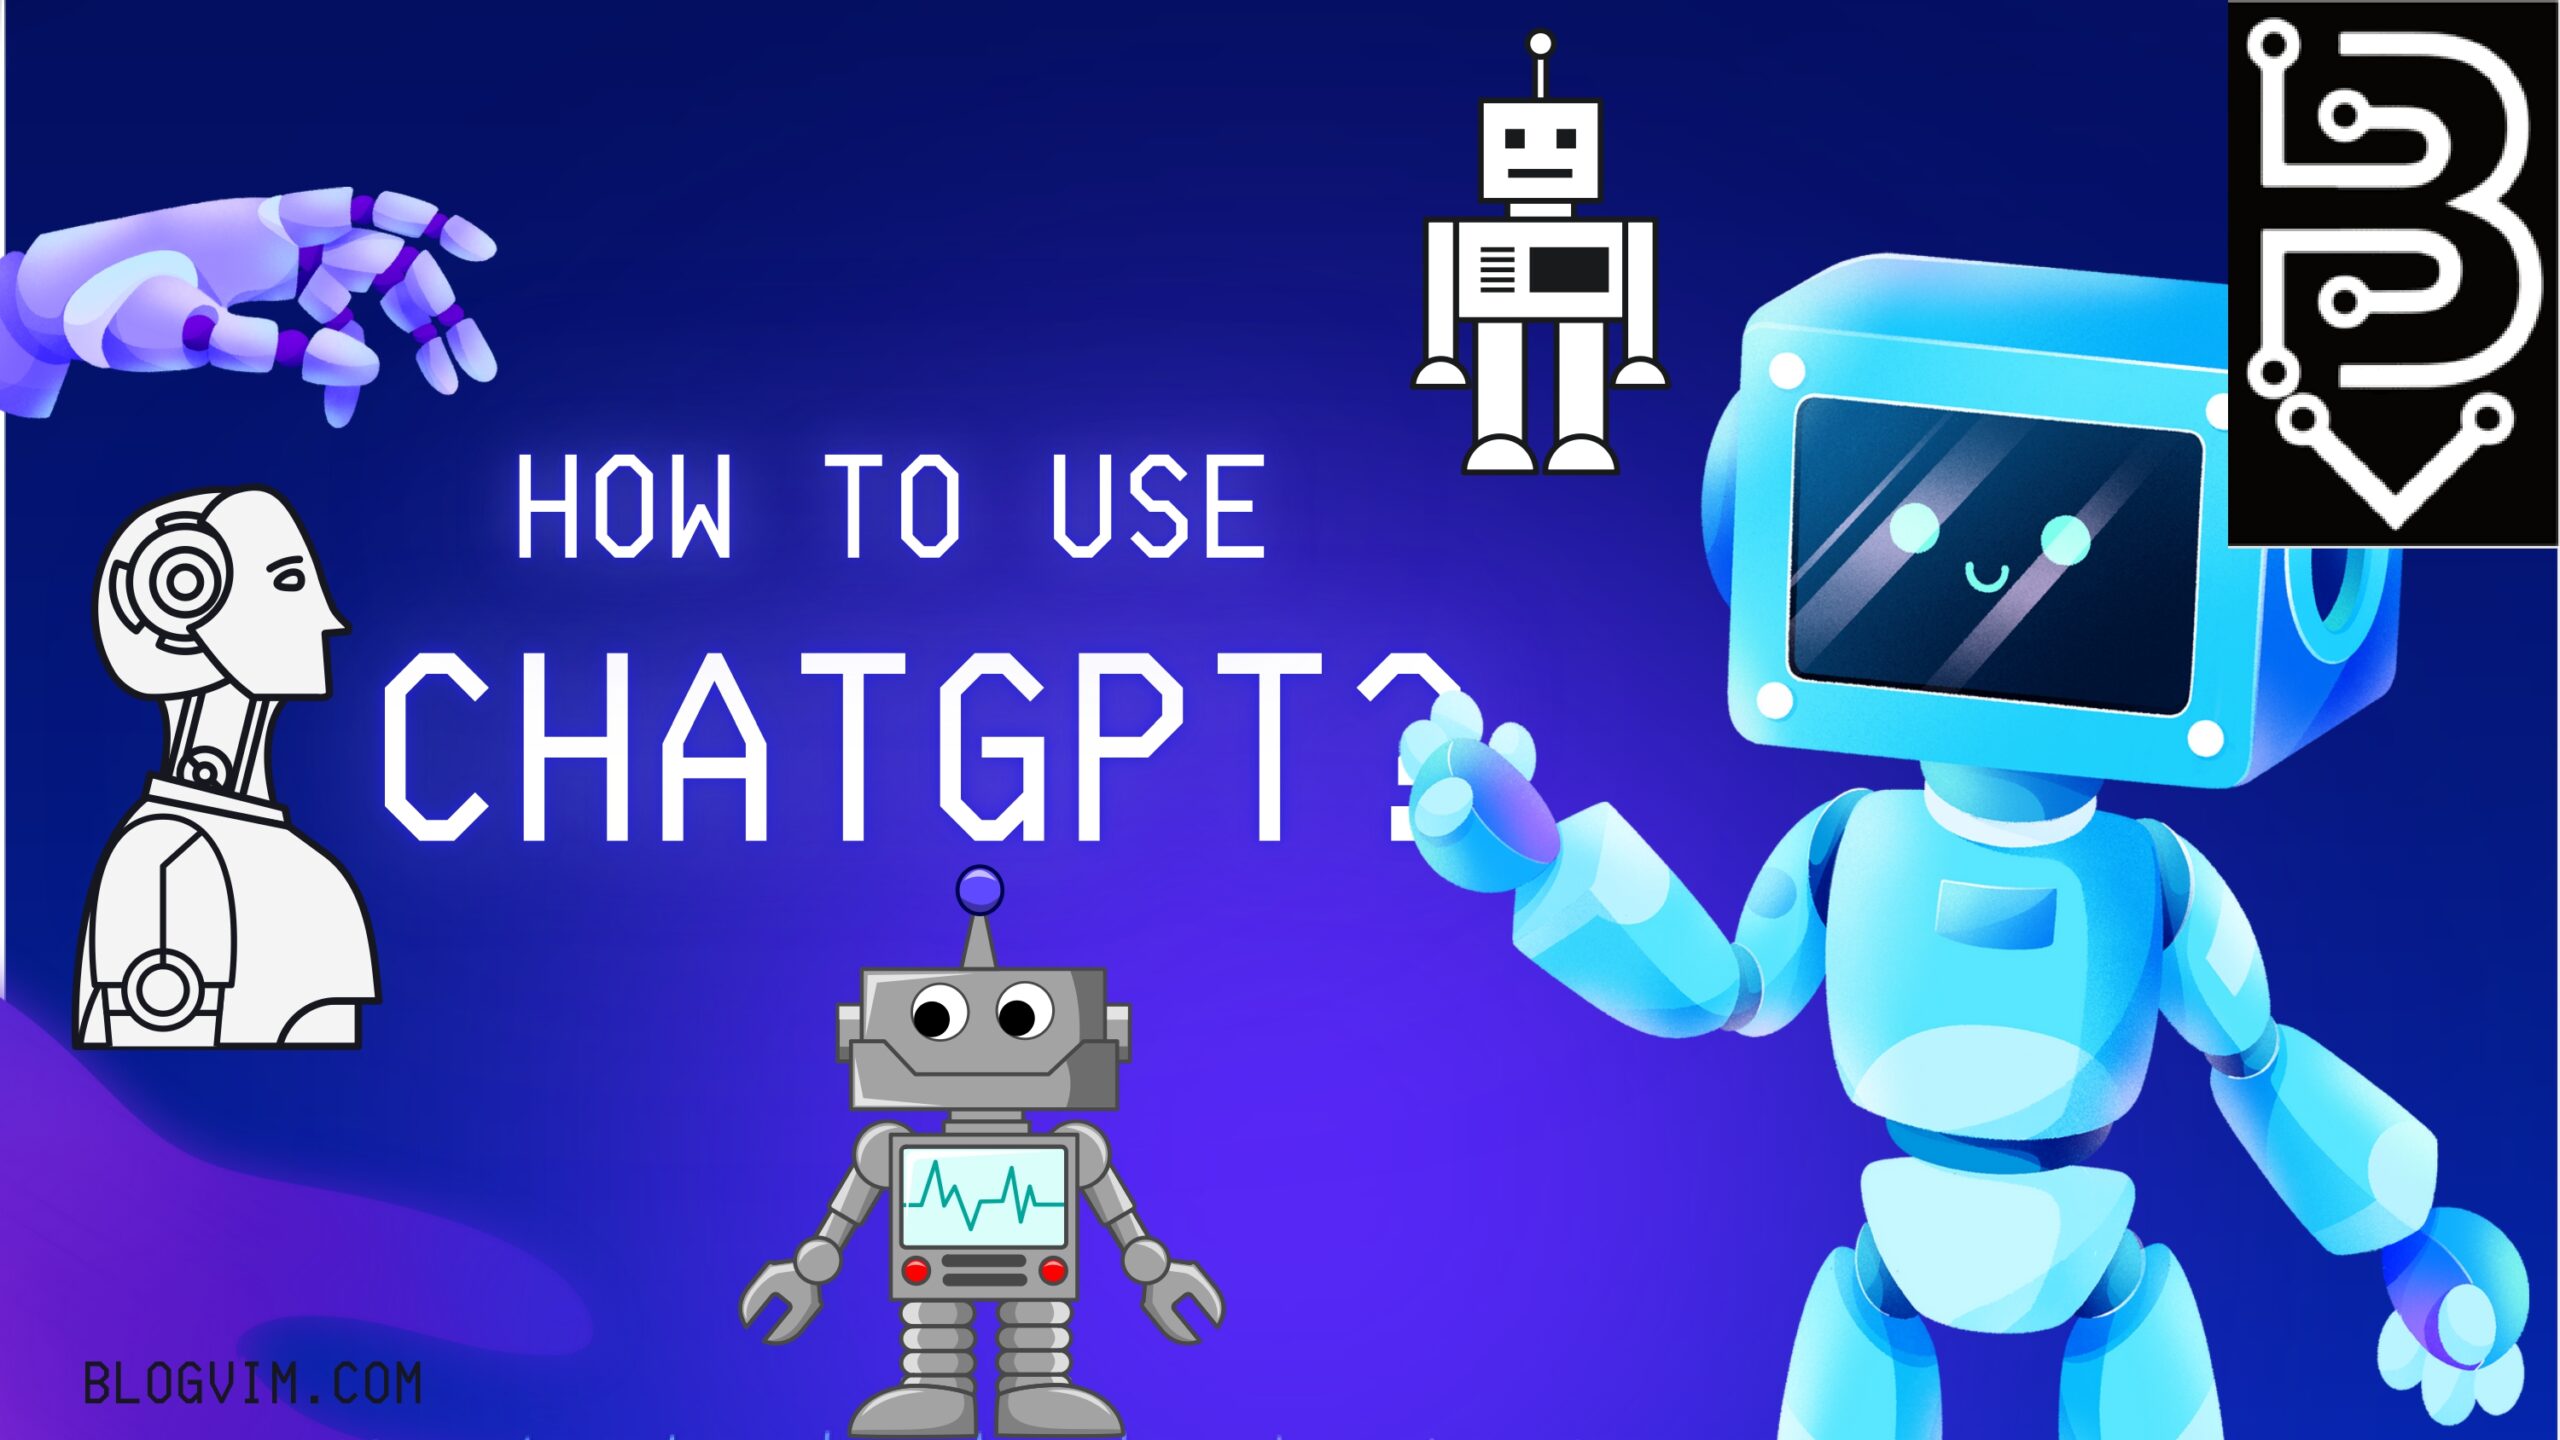 In this blog we will tell how to use chatgpt